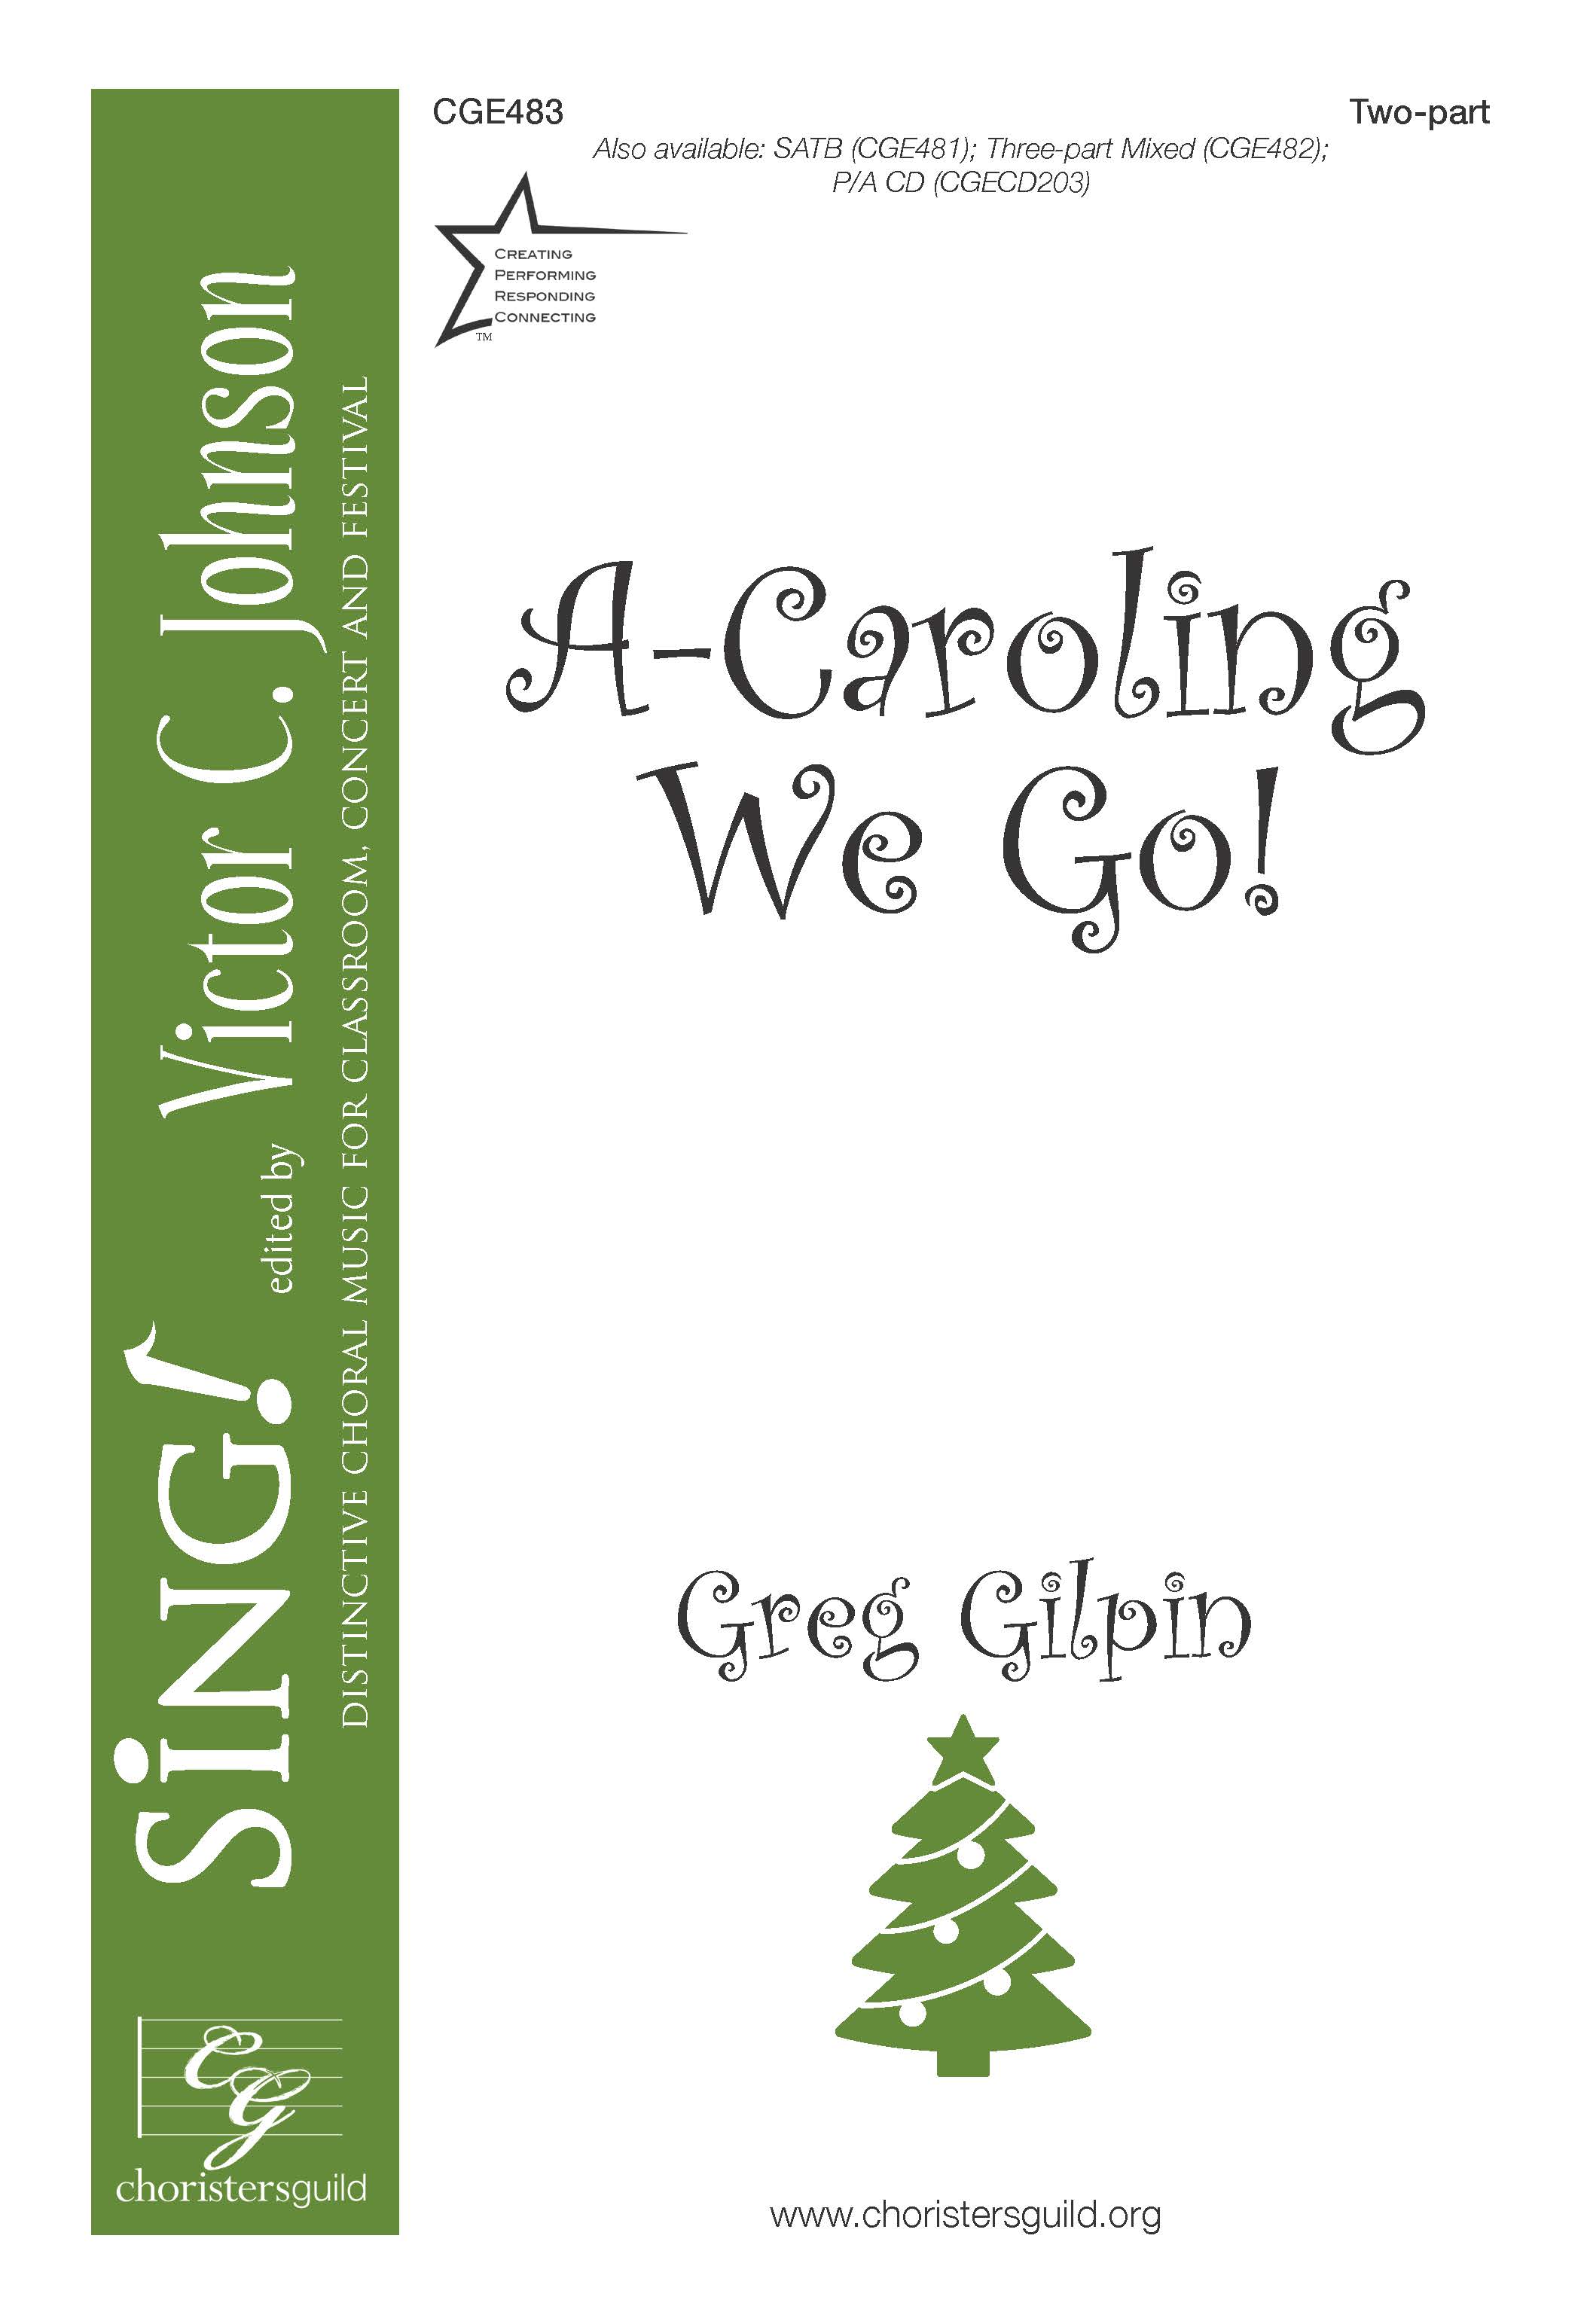 A-Caroling We Go - Two-part